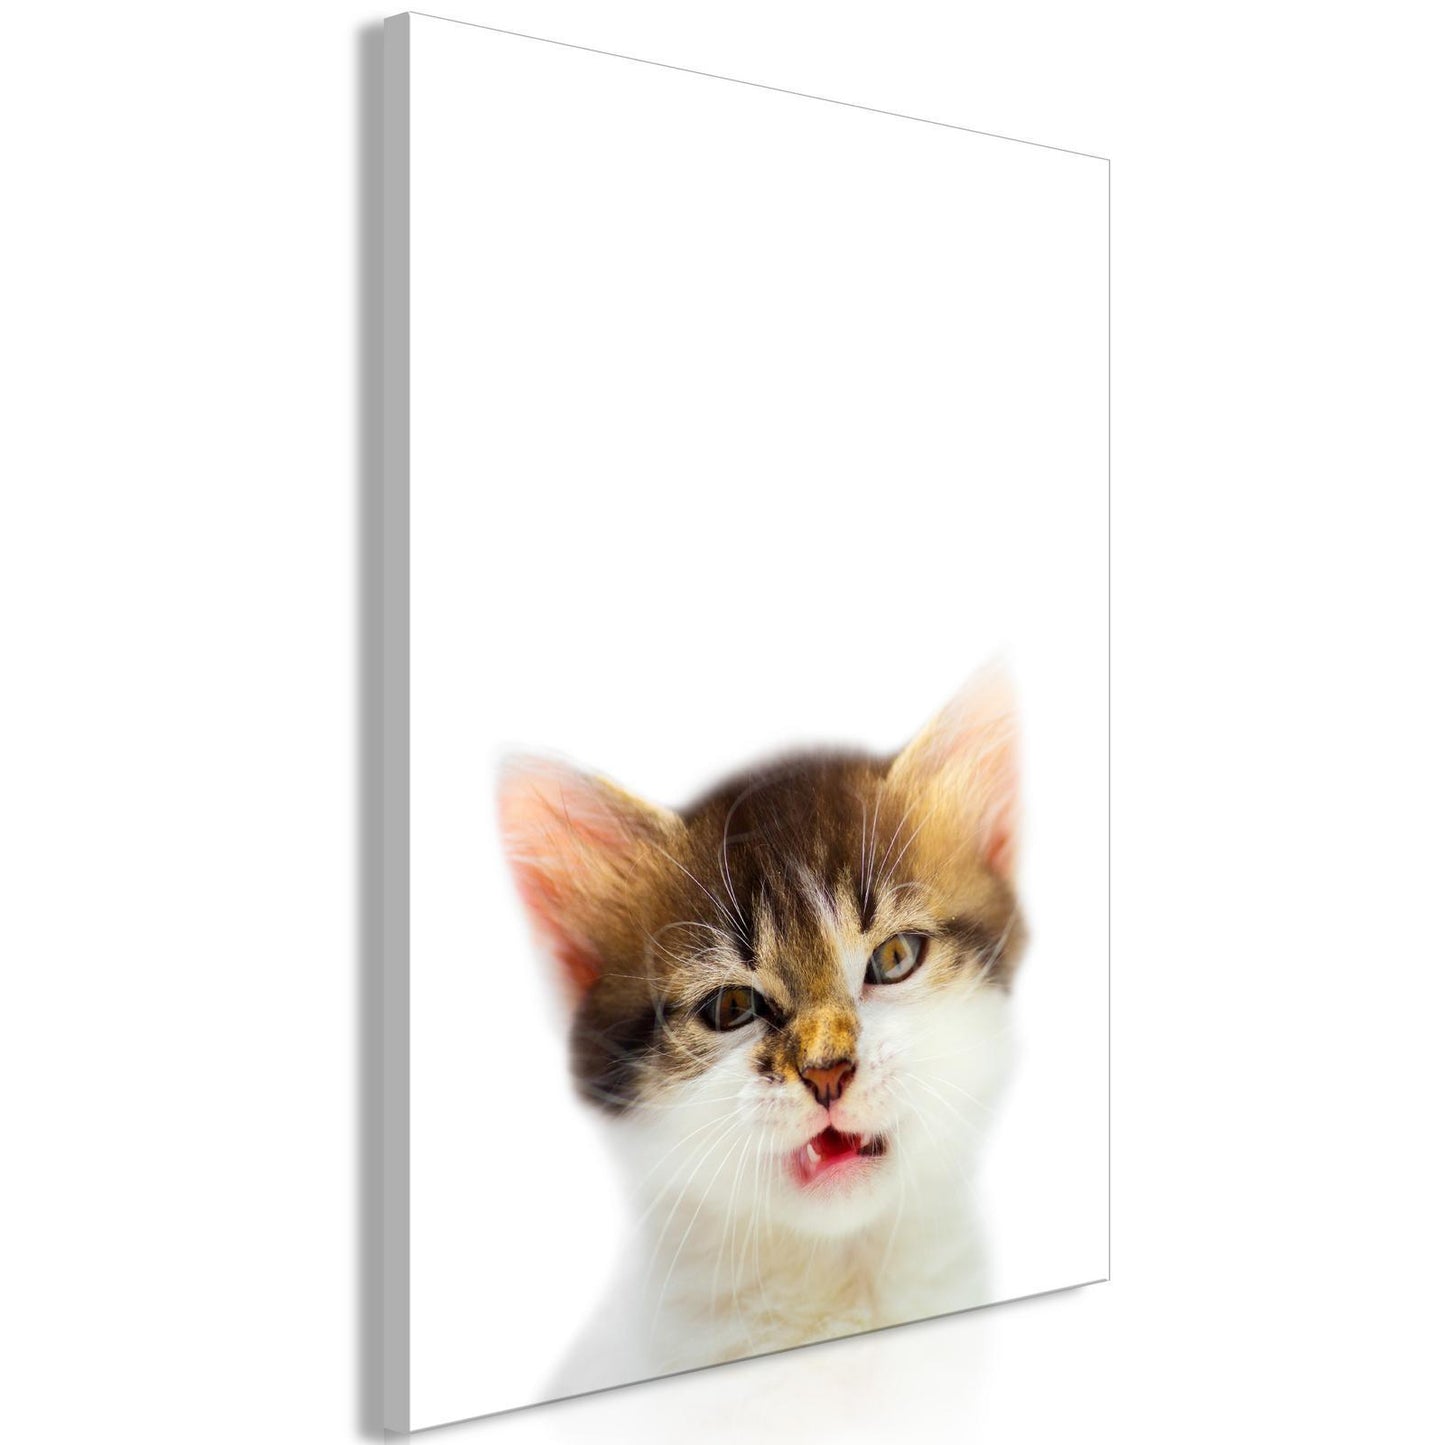 Schilderij - Cat Style (1-part) - Domestic Animal with a Touch of Wildness in Focus